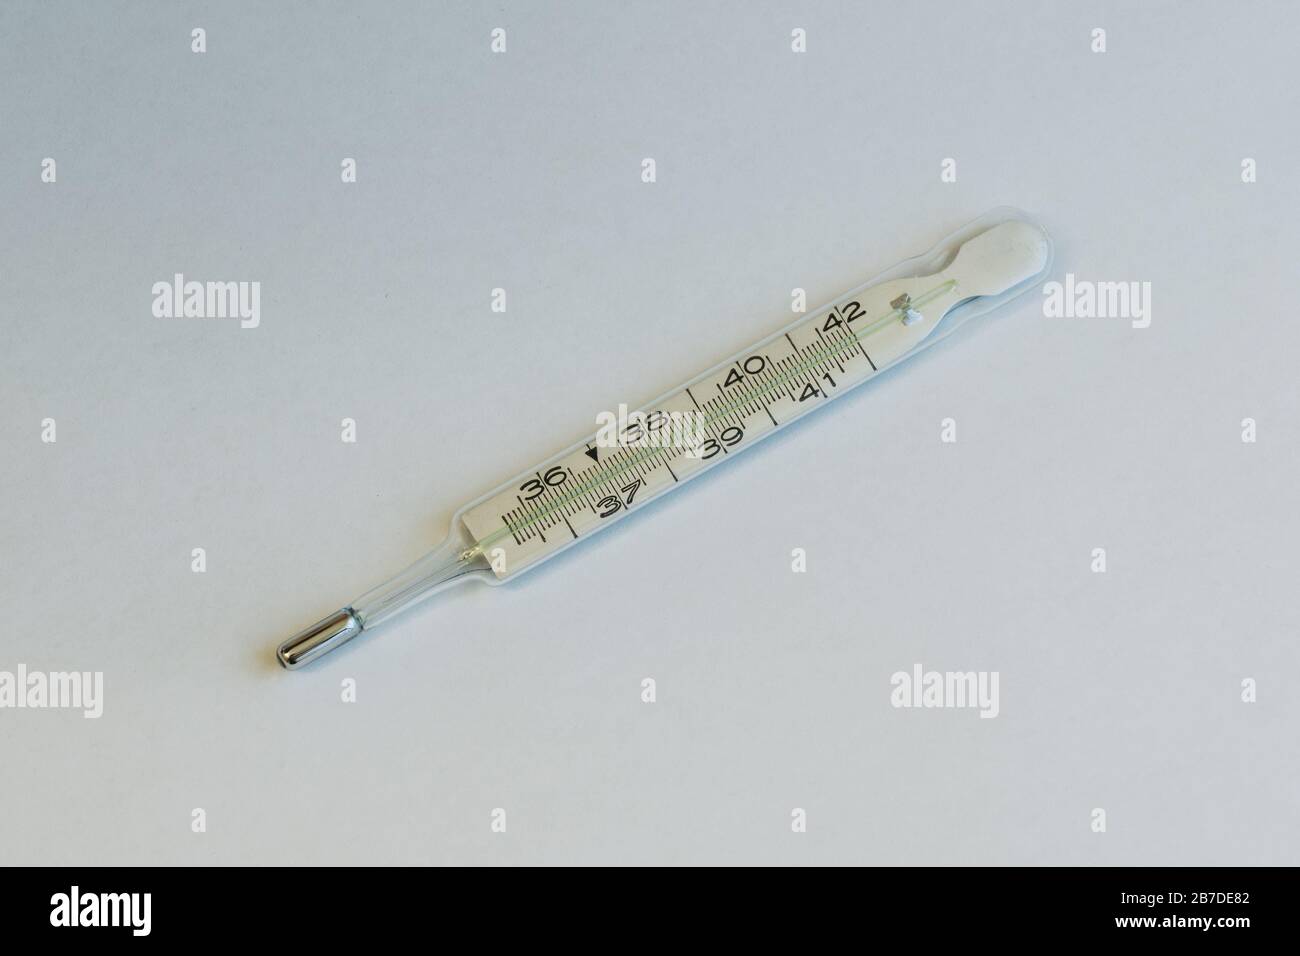 Clinical Fever Thermometer on White Background, a Concept for Illness, Fever, Corona Virus Covid-19 and Healthcare Stock Photo